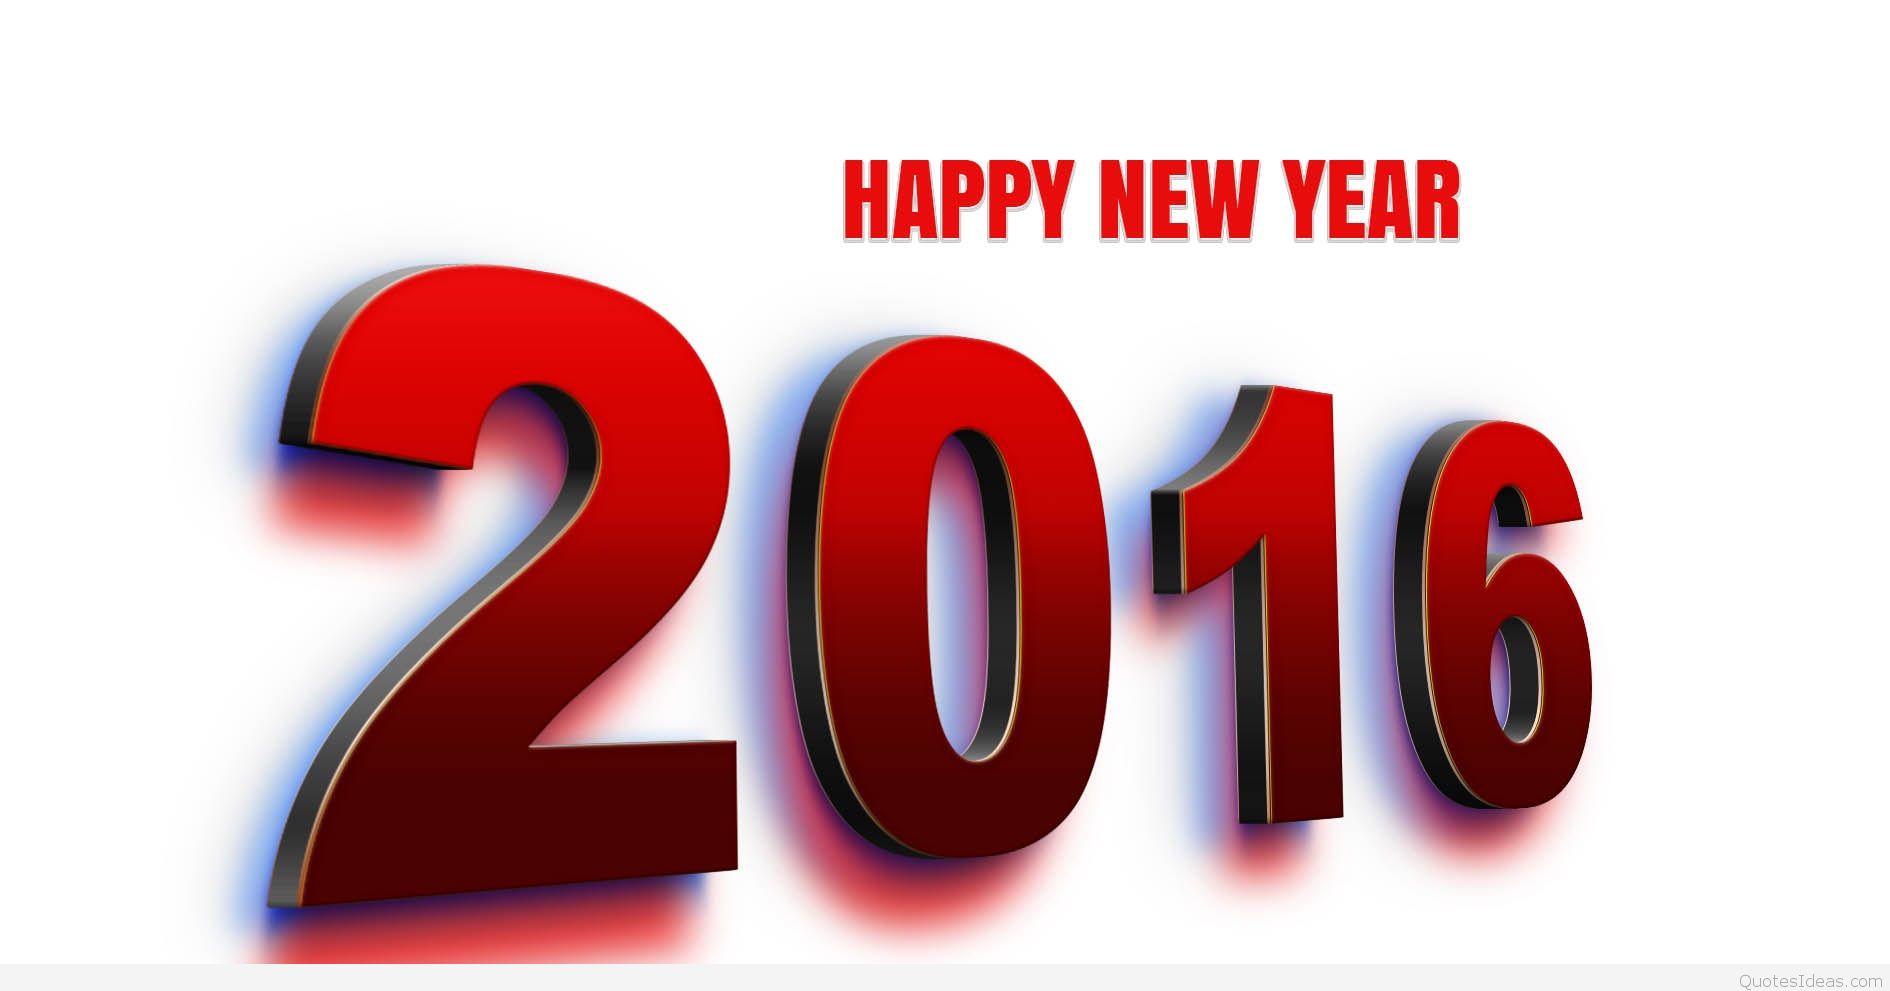 happy new year images clip art - photo #27